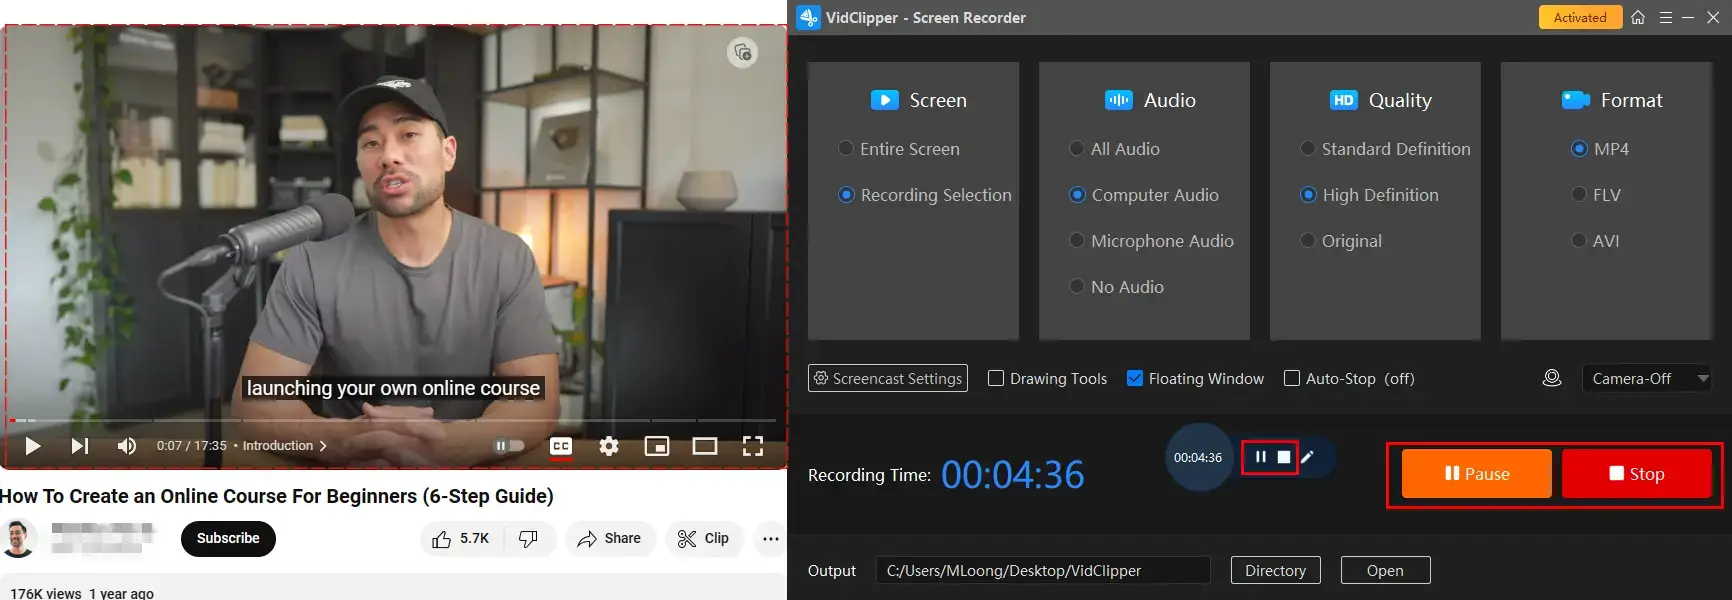 how to record lectures on windows with workintool vidclipper drawing toolbar